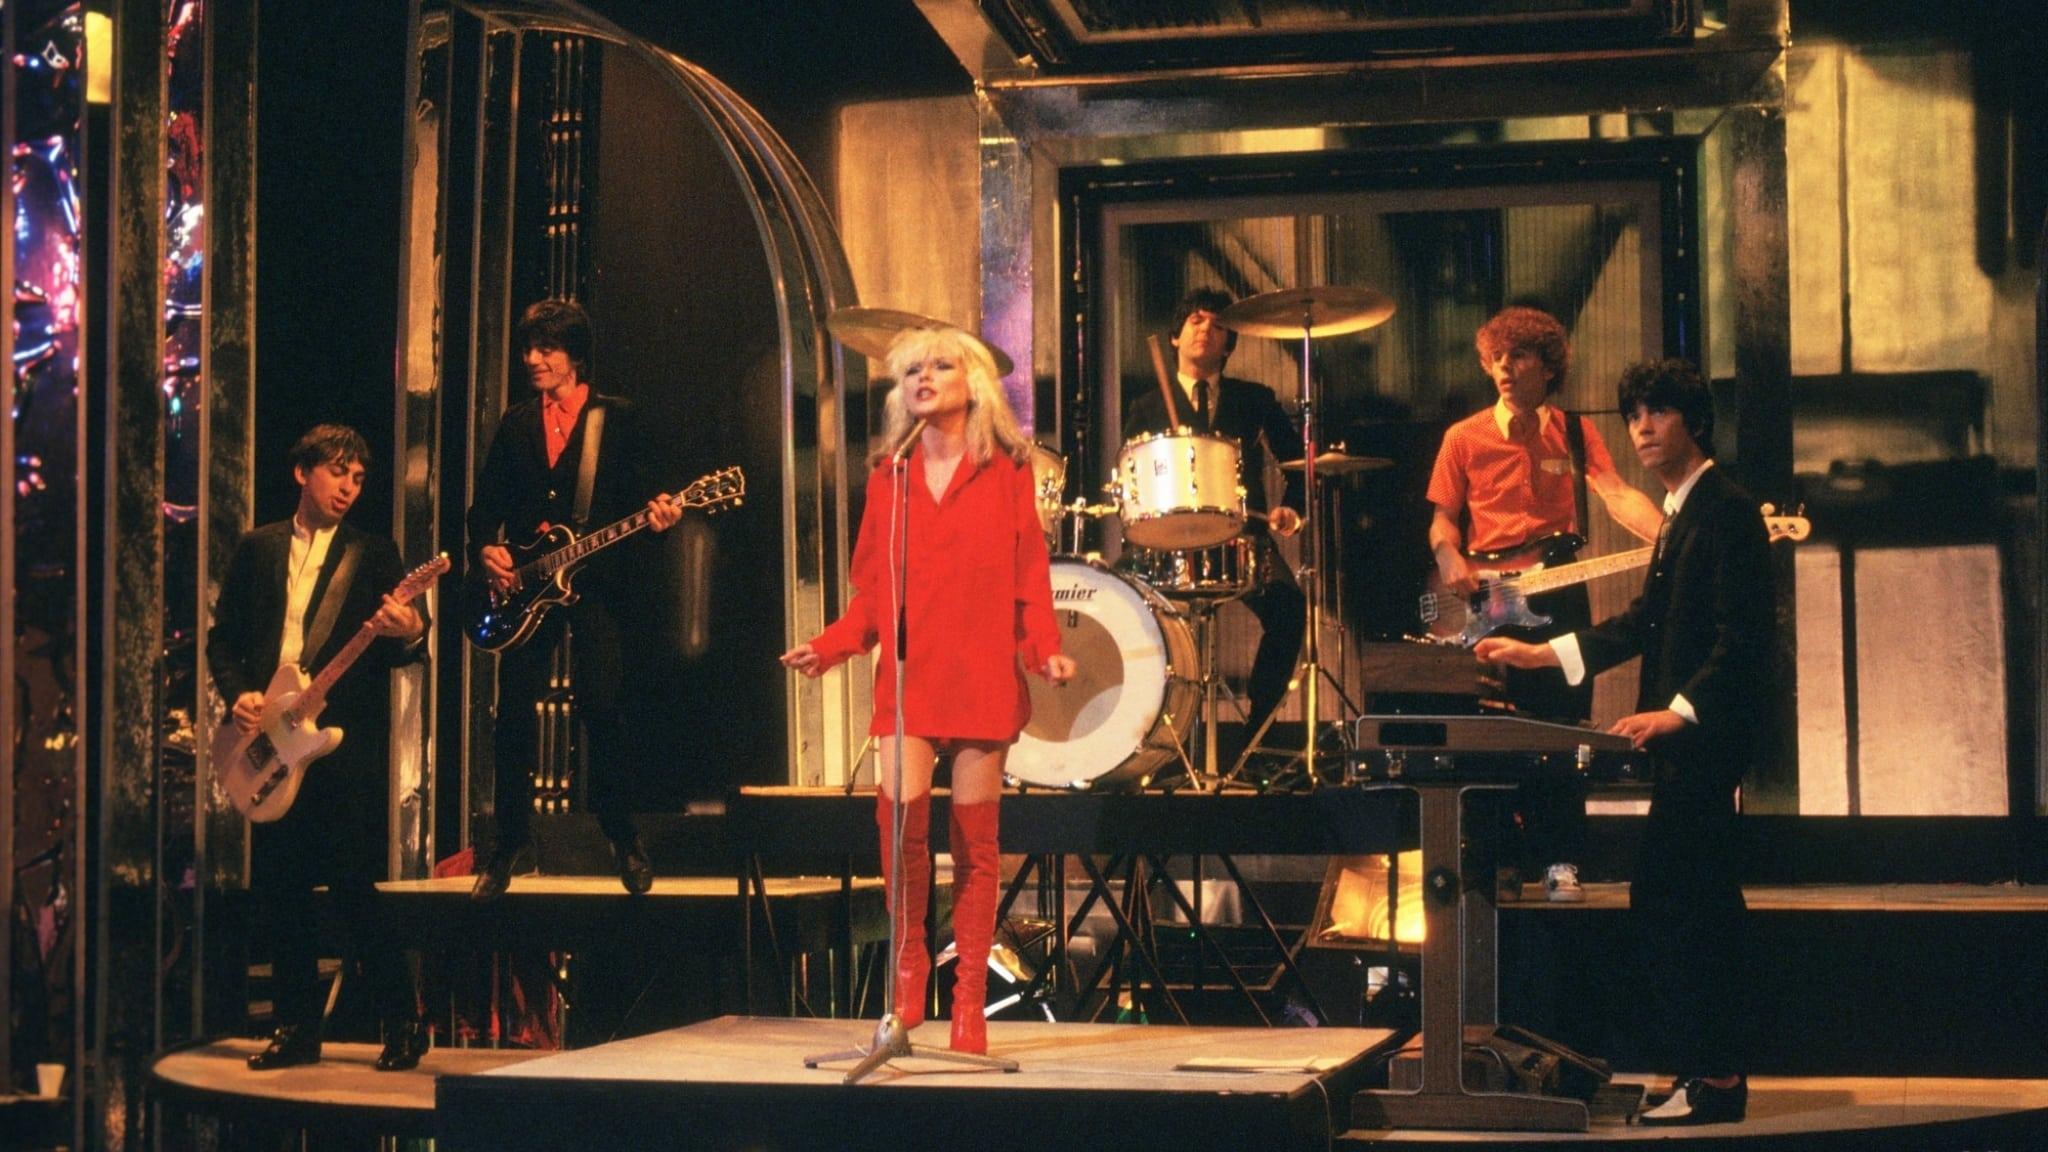 When Blondie Came to Britain backdrop